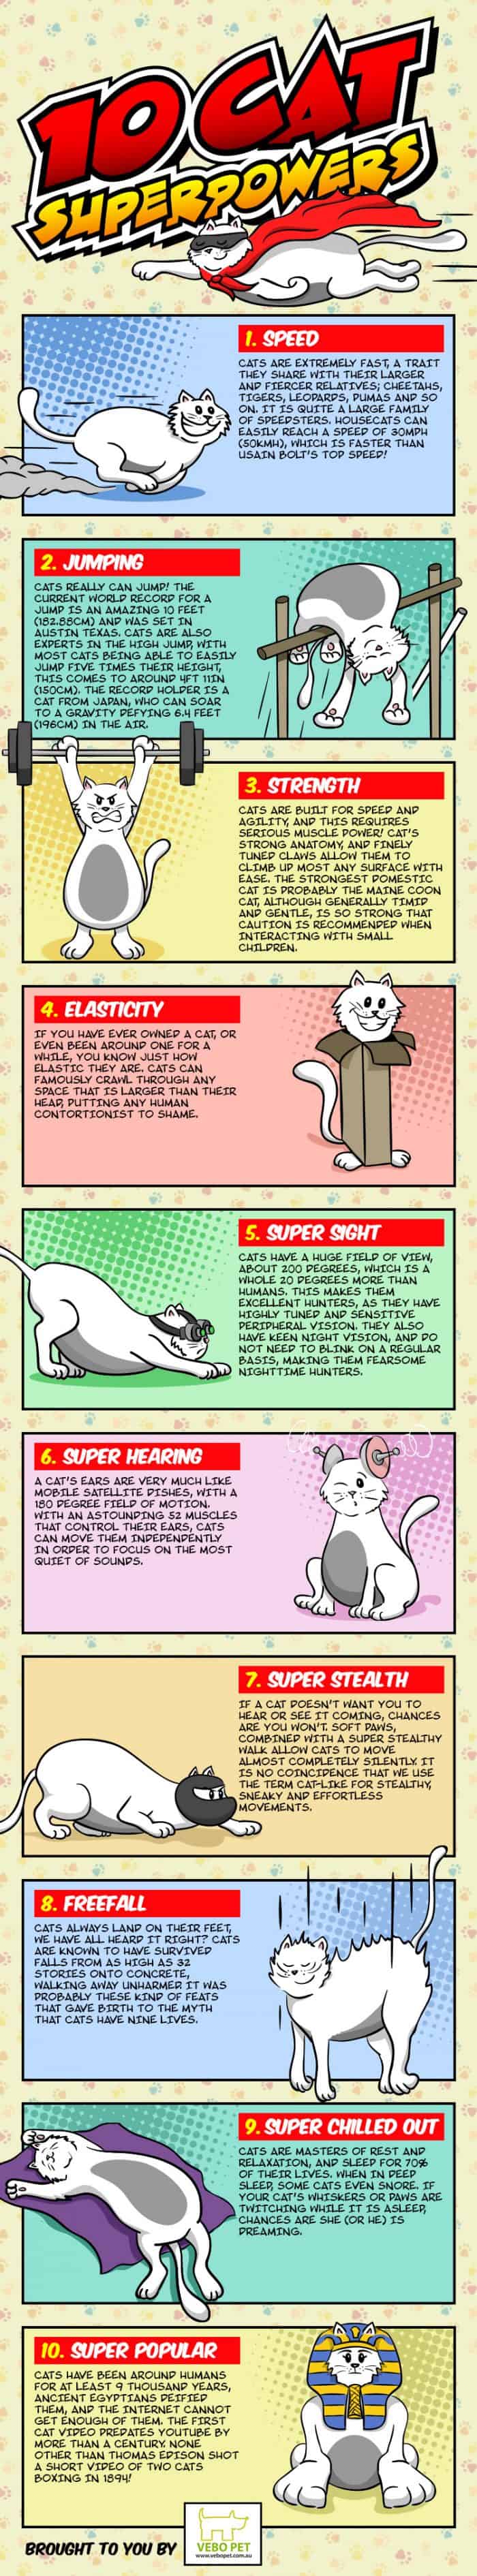 Superpowers of Cats